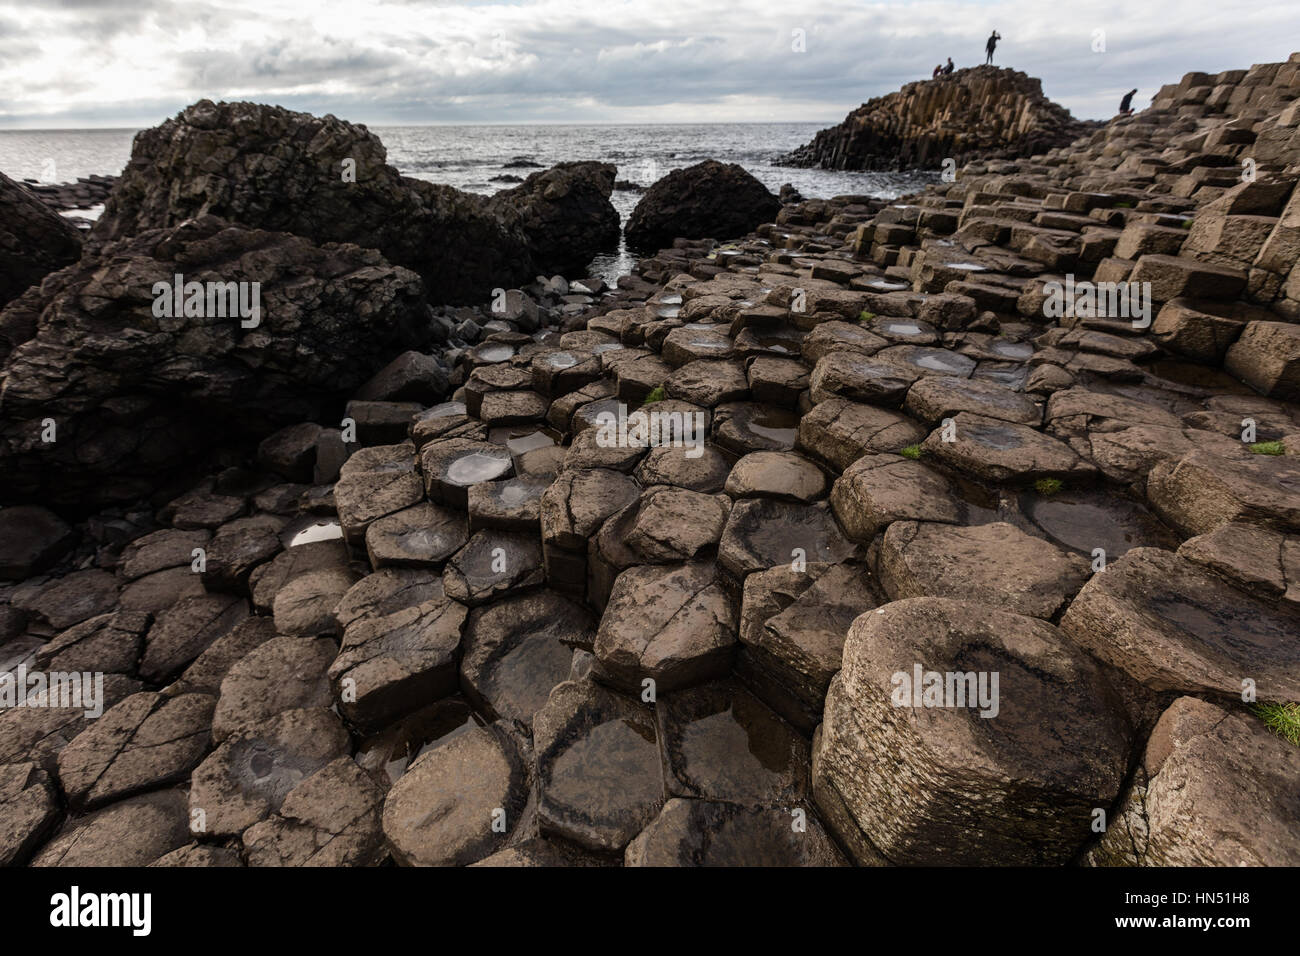 The Giant's Causeway is an area of about 40,000 interlocking basalt columns, the result of an ancient volcanic eruption. Stock Photo